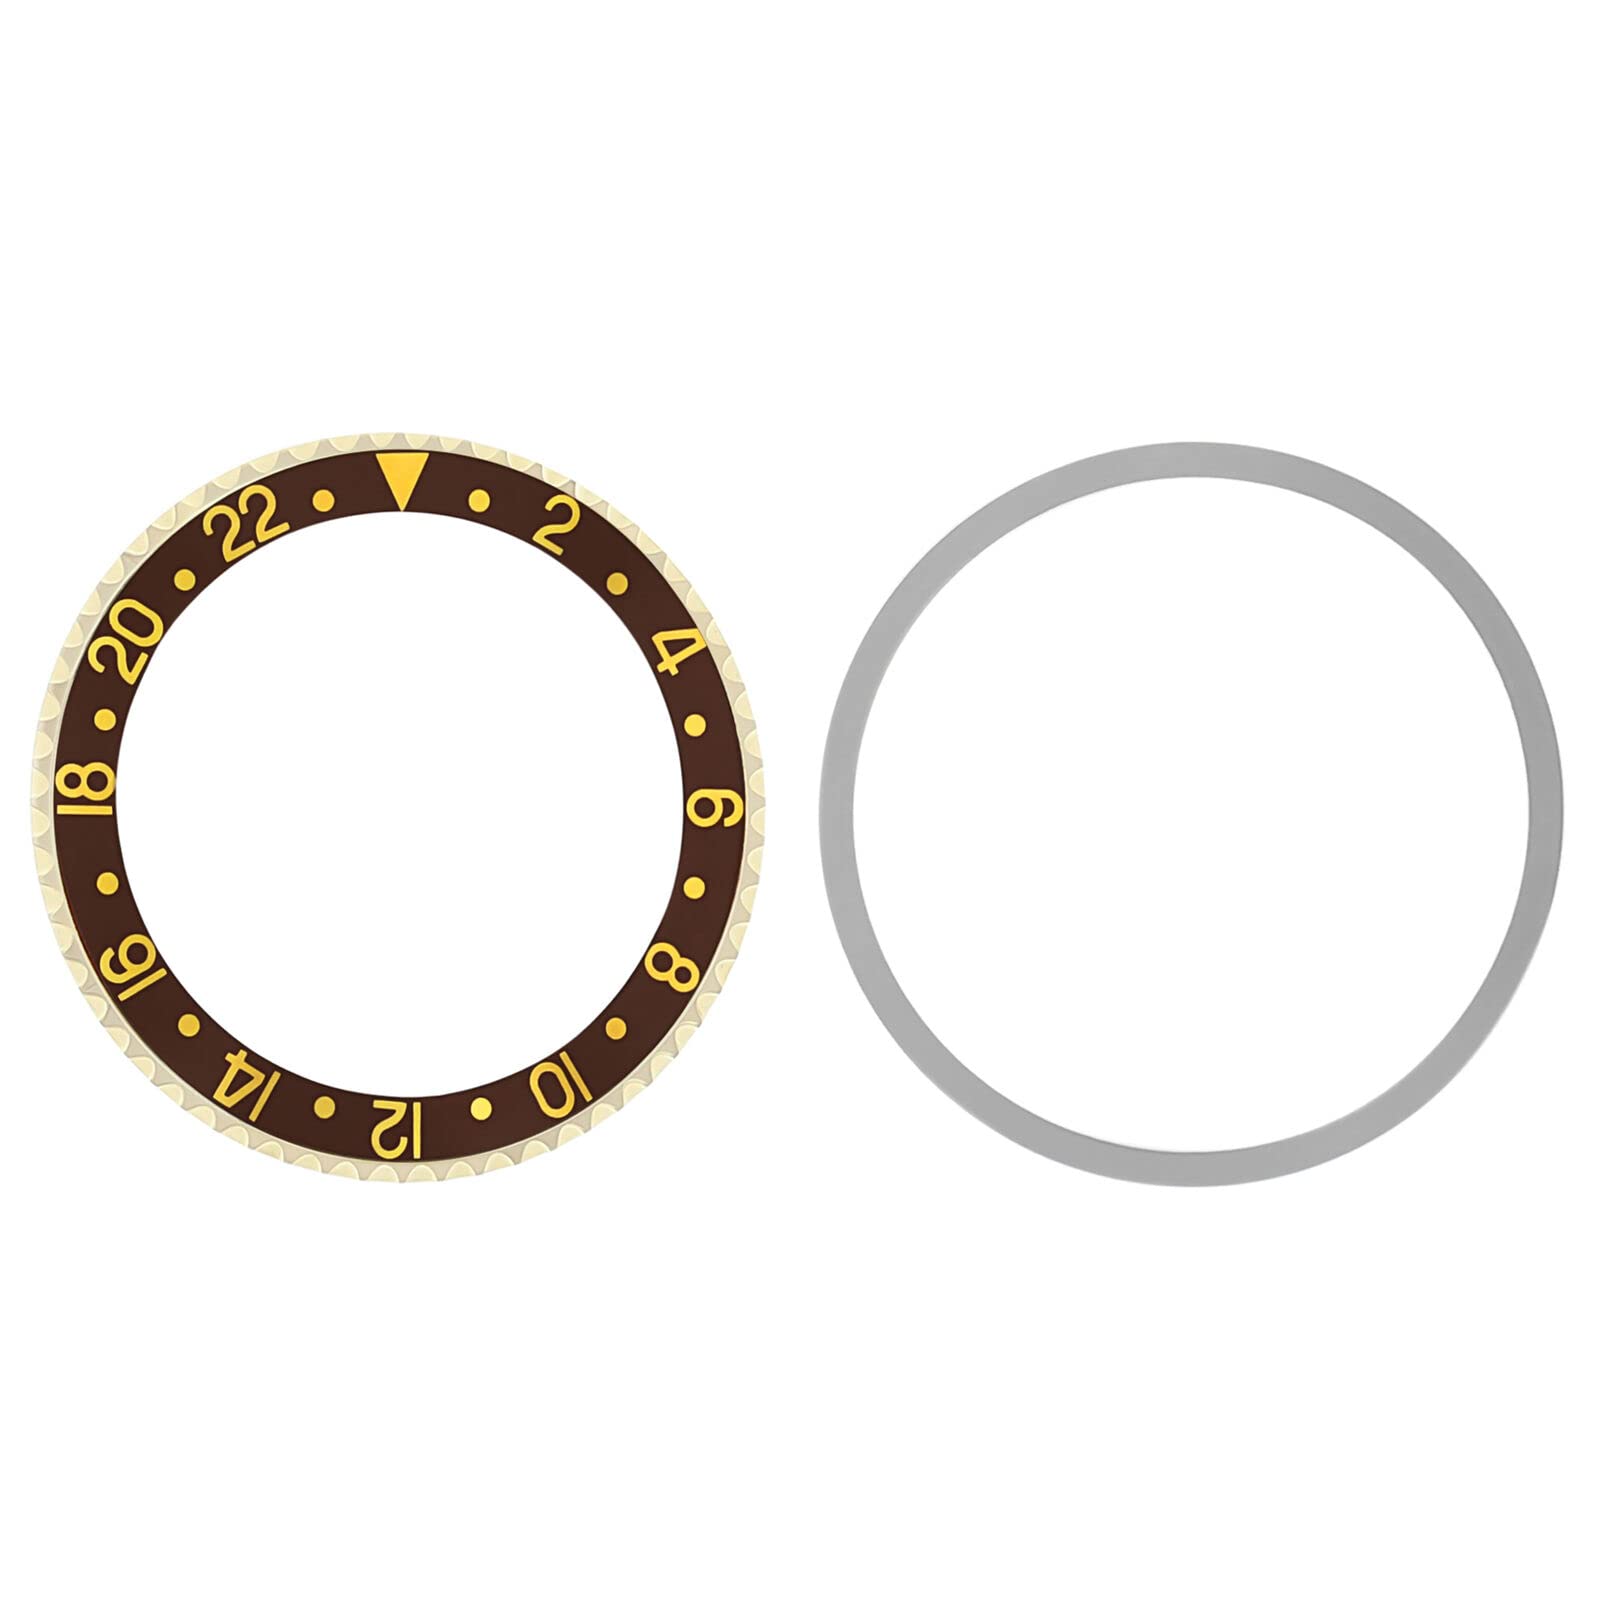 Ewatchparts BEZEL+INSERT COMPATIBLE WITH OLDER ROLEX GMT 18KY GOLD 1670, 1675, 16750, 16753, 16758 BROWN